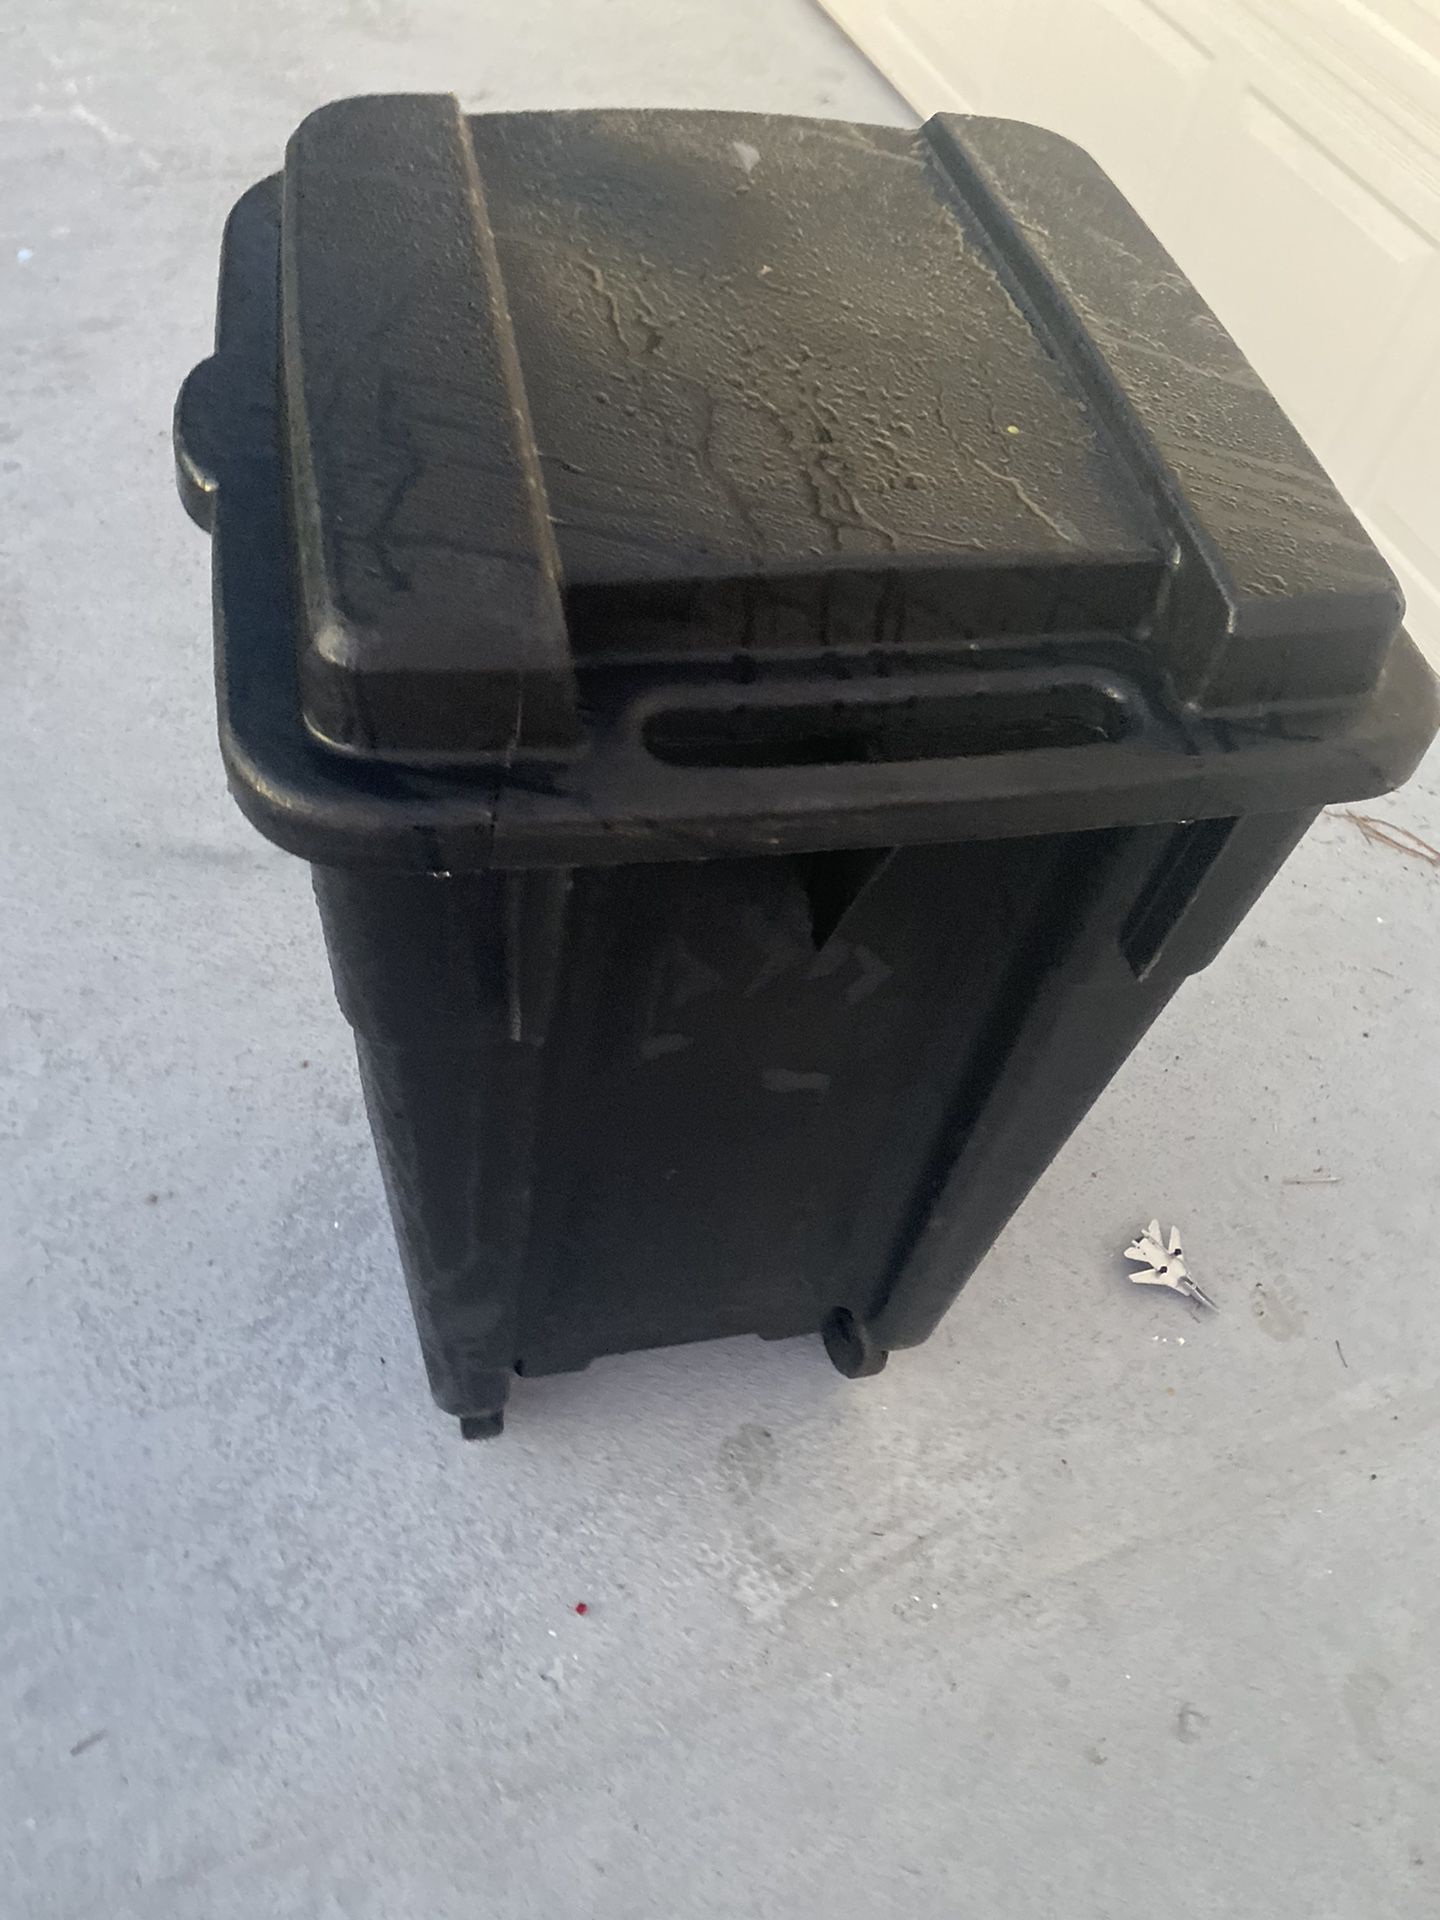 Trash can / garbage can